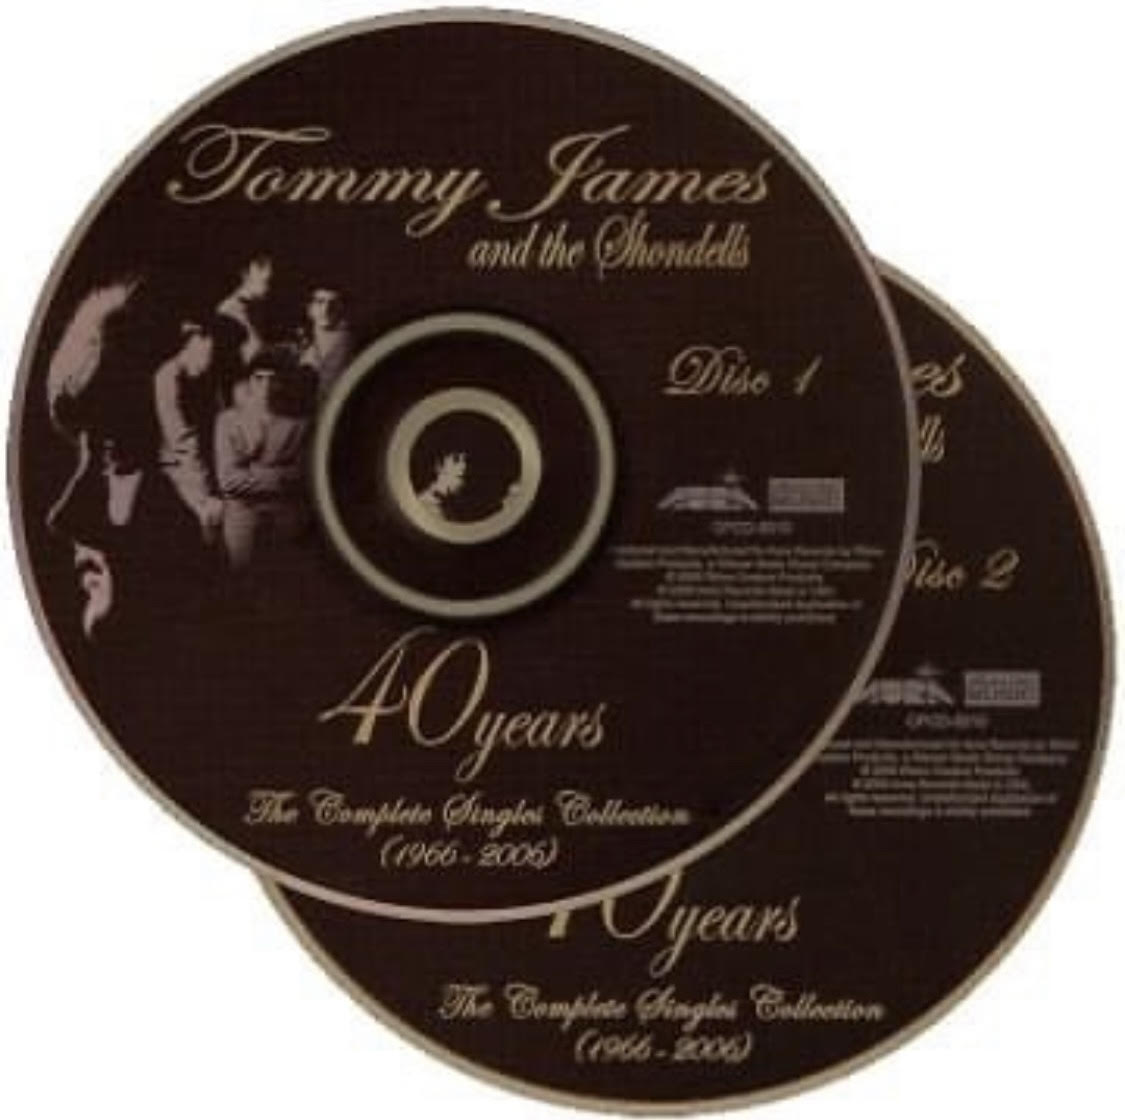 CD Front